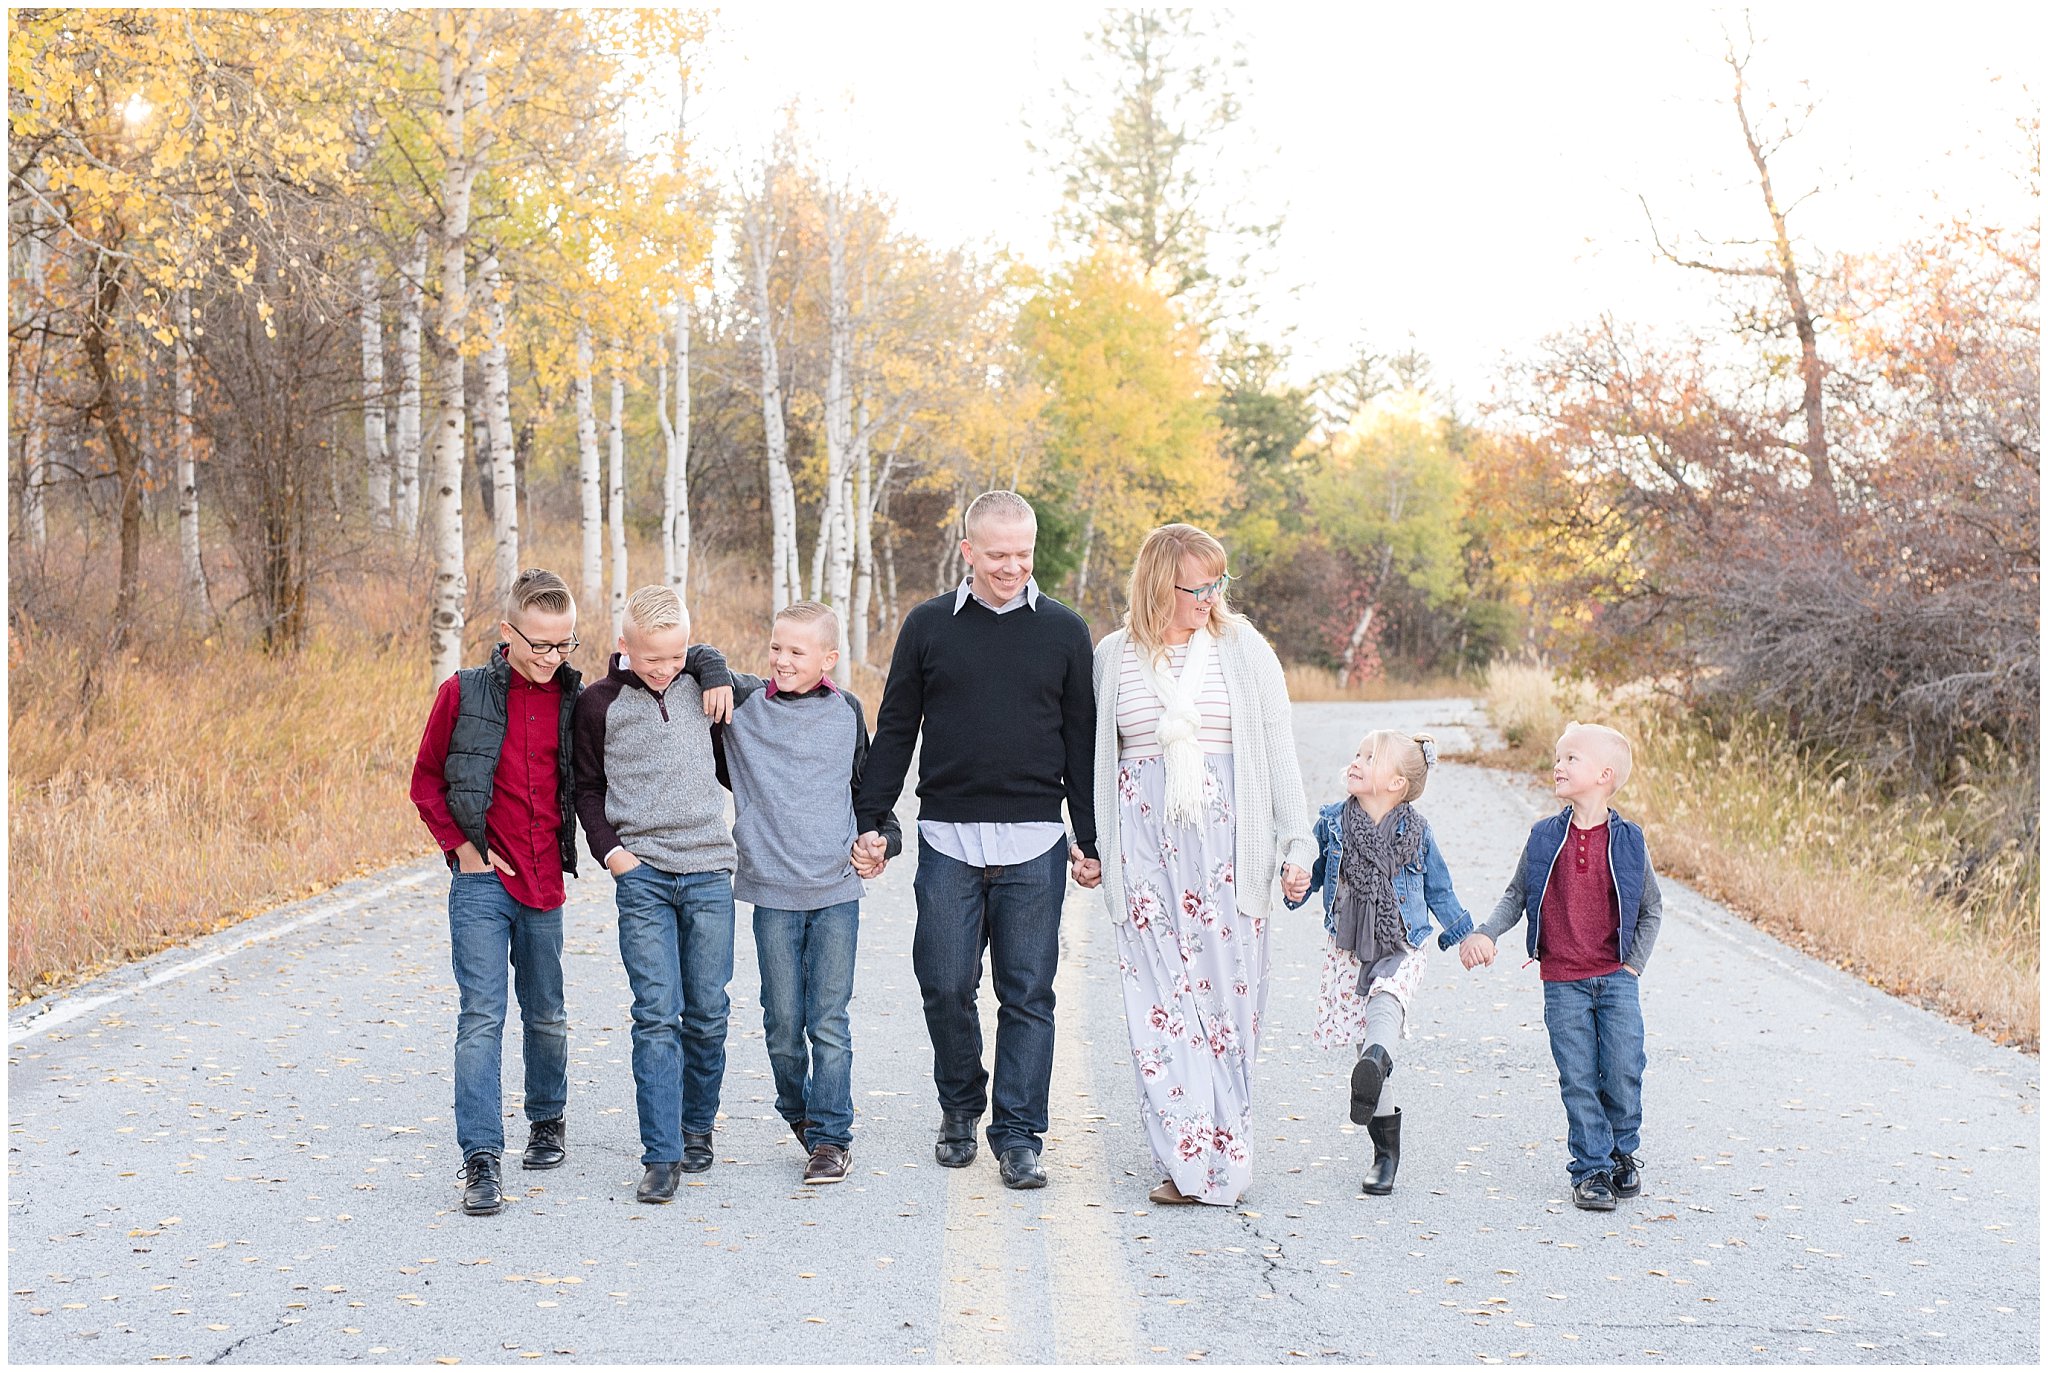 Family with five kids walking | Fall Family Pictures in the Mountains | Snowbasin, Utah | Jessie and Dallin Photography